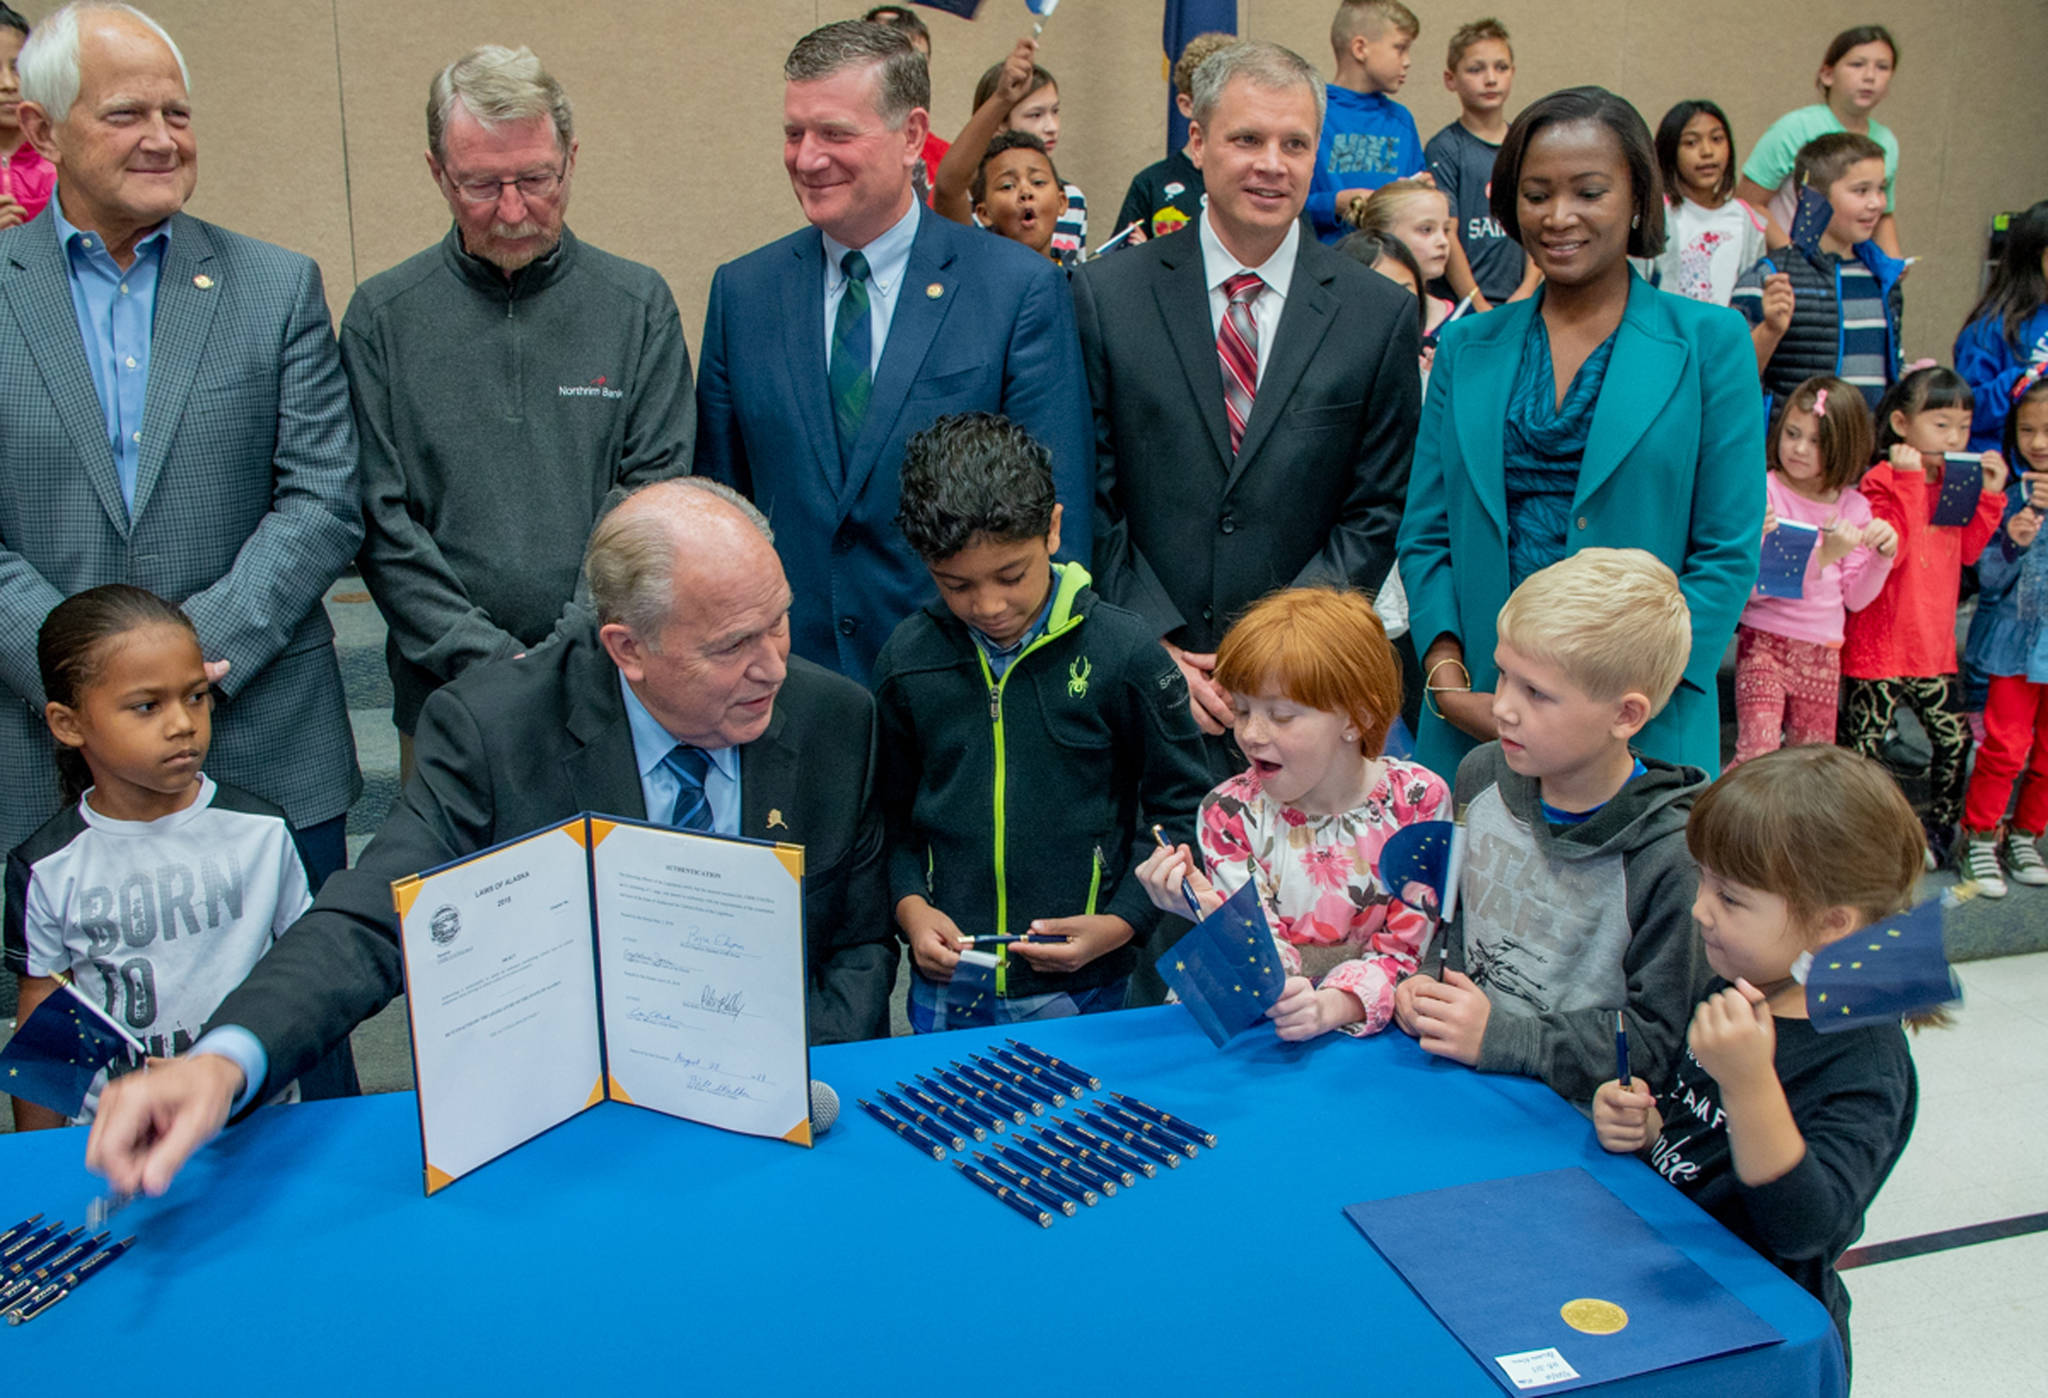 Governor Walker signs House Bill 333 at Bowman Elementary School on Tuesday, Aug. 28, 2018 in Anchorage. (Brice Habeger photo | Office of the Governor)